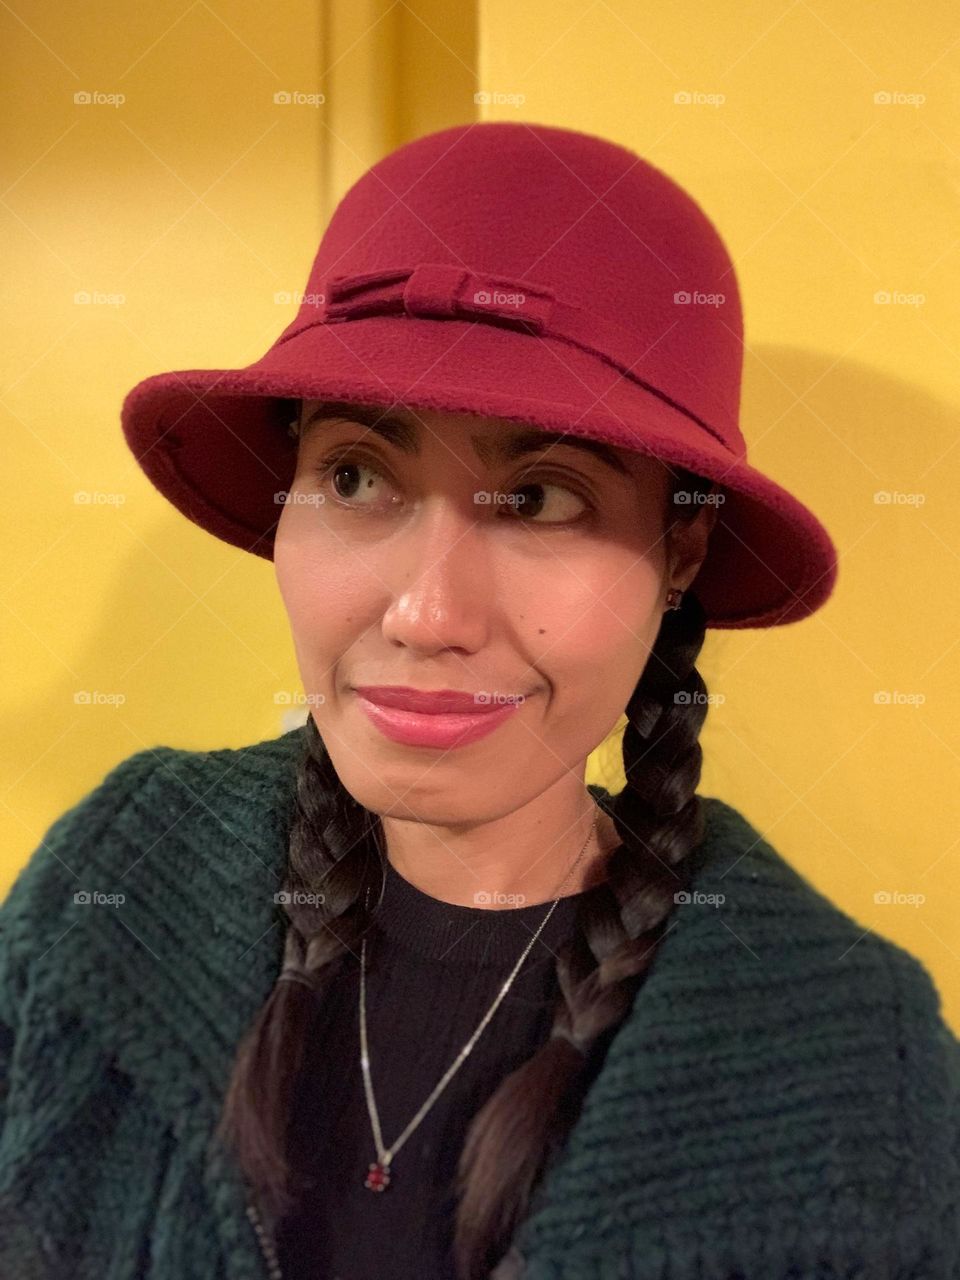 A woman wearing a red hat and green sweater.